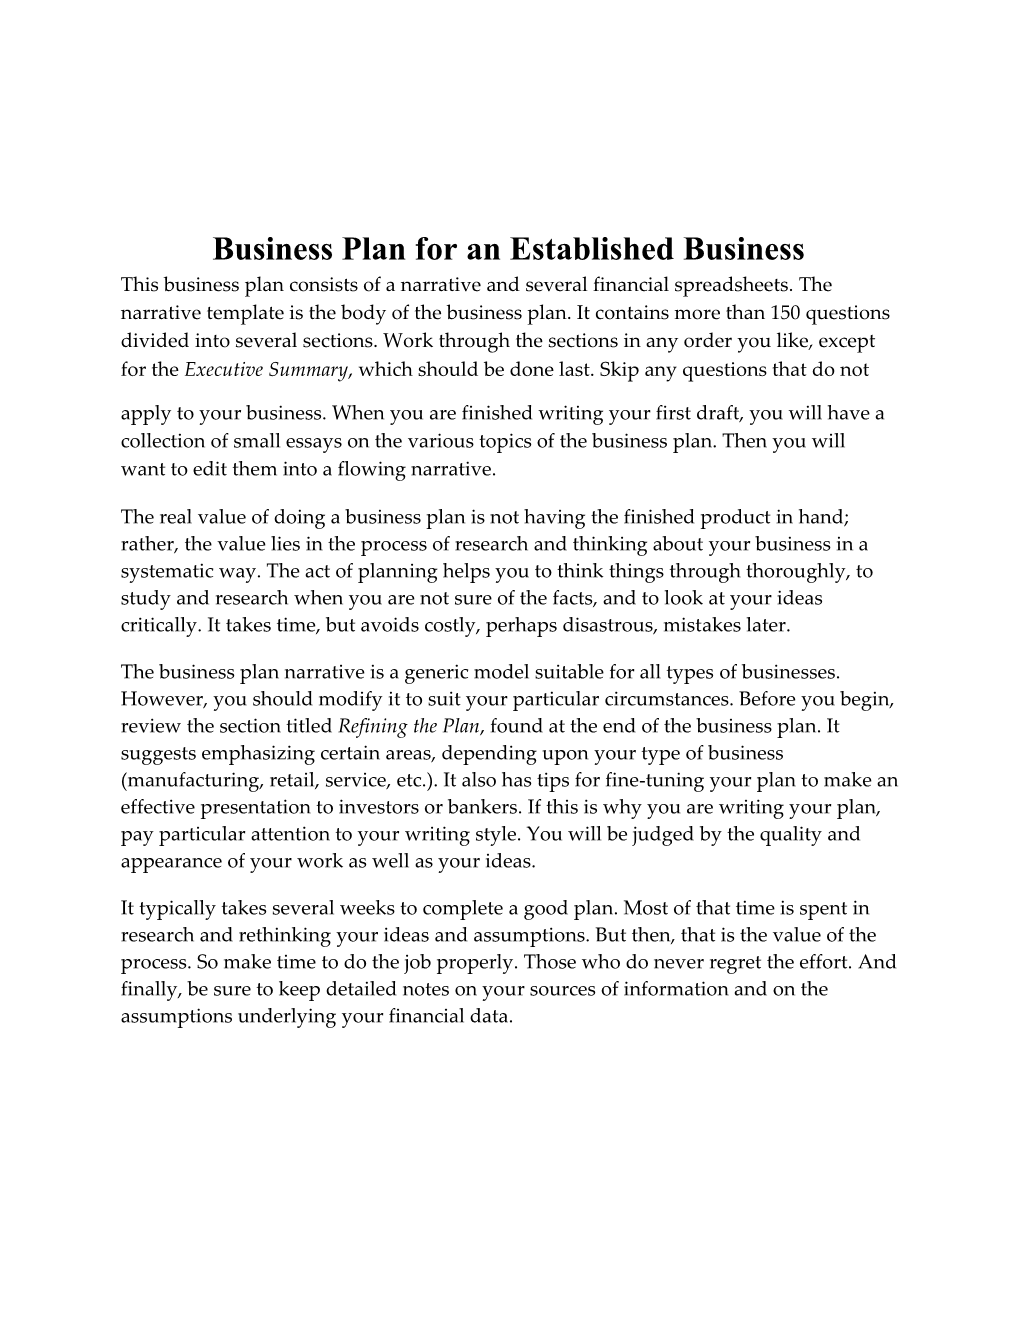 Business Plan for Established Business Template